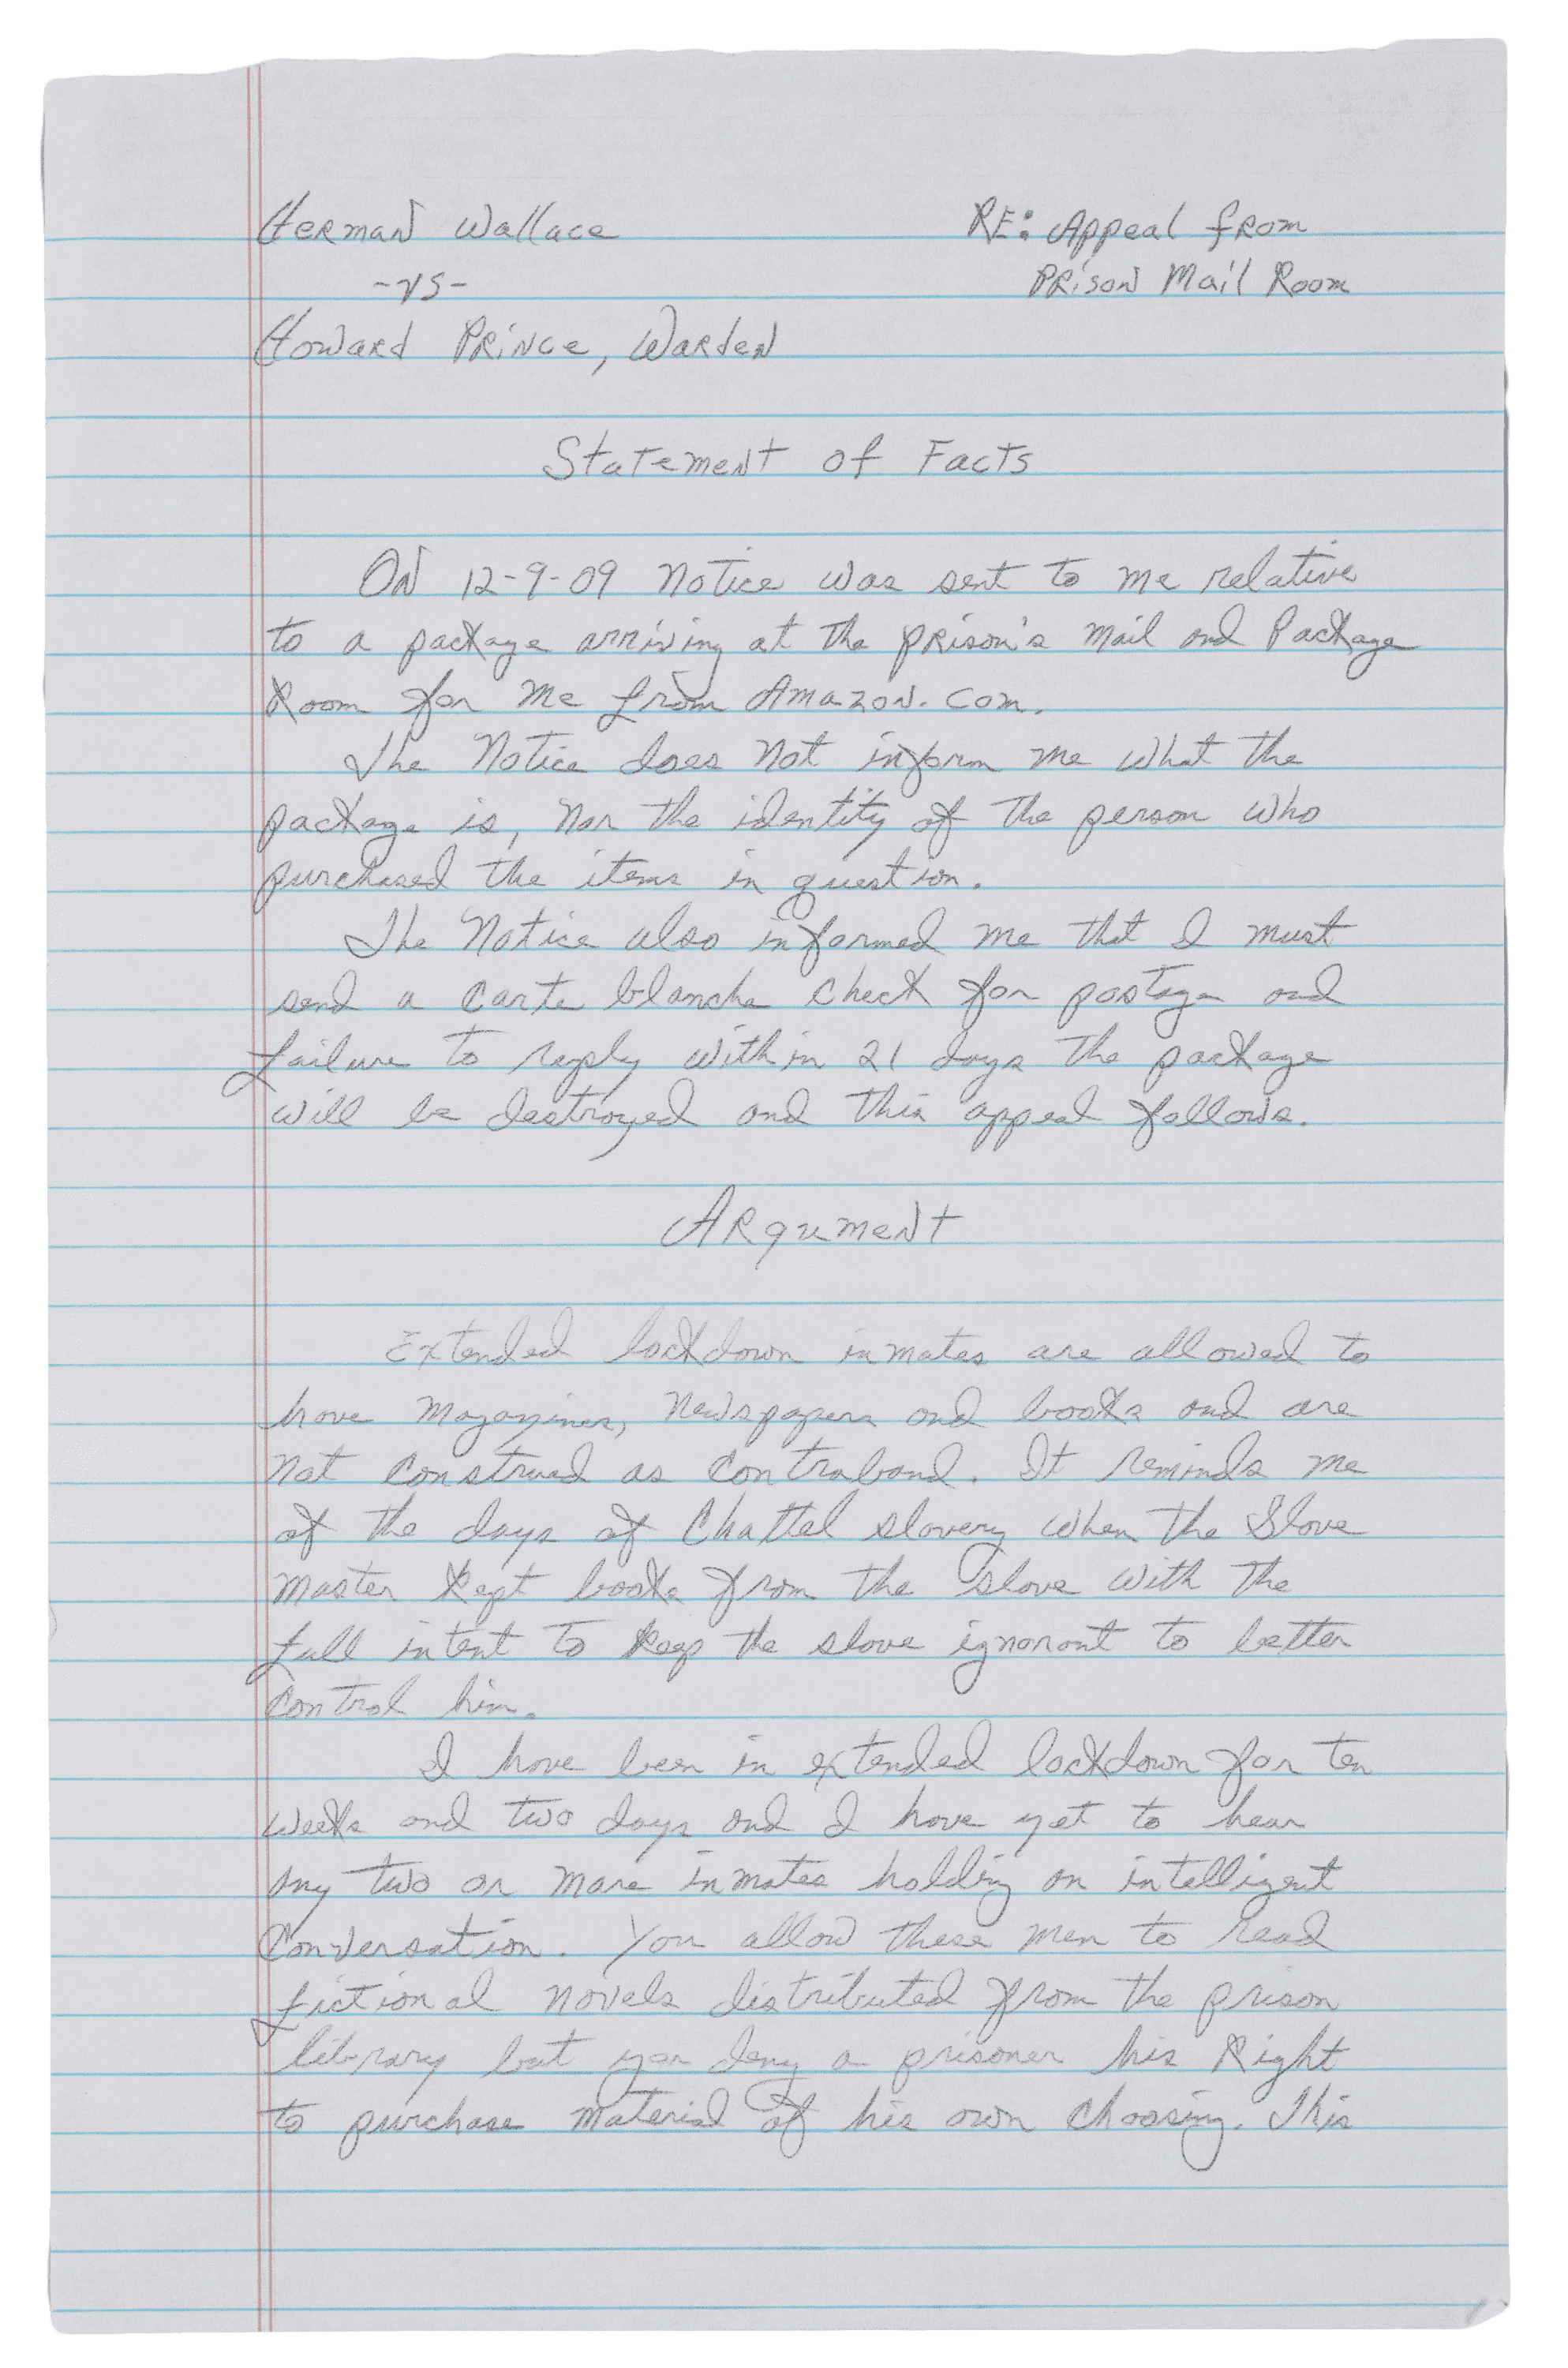 A handwritten appeal by Herman Wallace on looseleaf paper. He has written a "Statement of Facts" and "Argument" section.